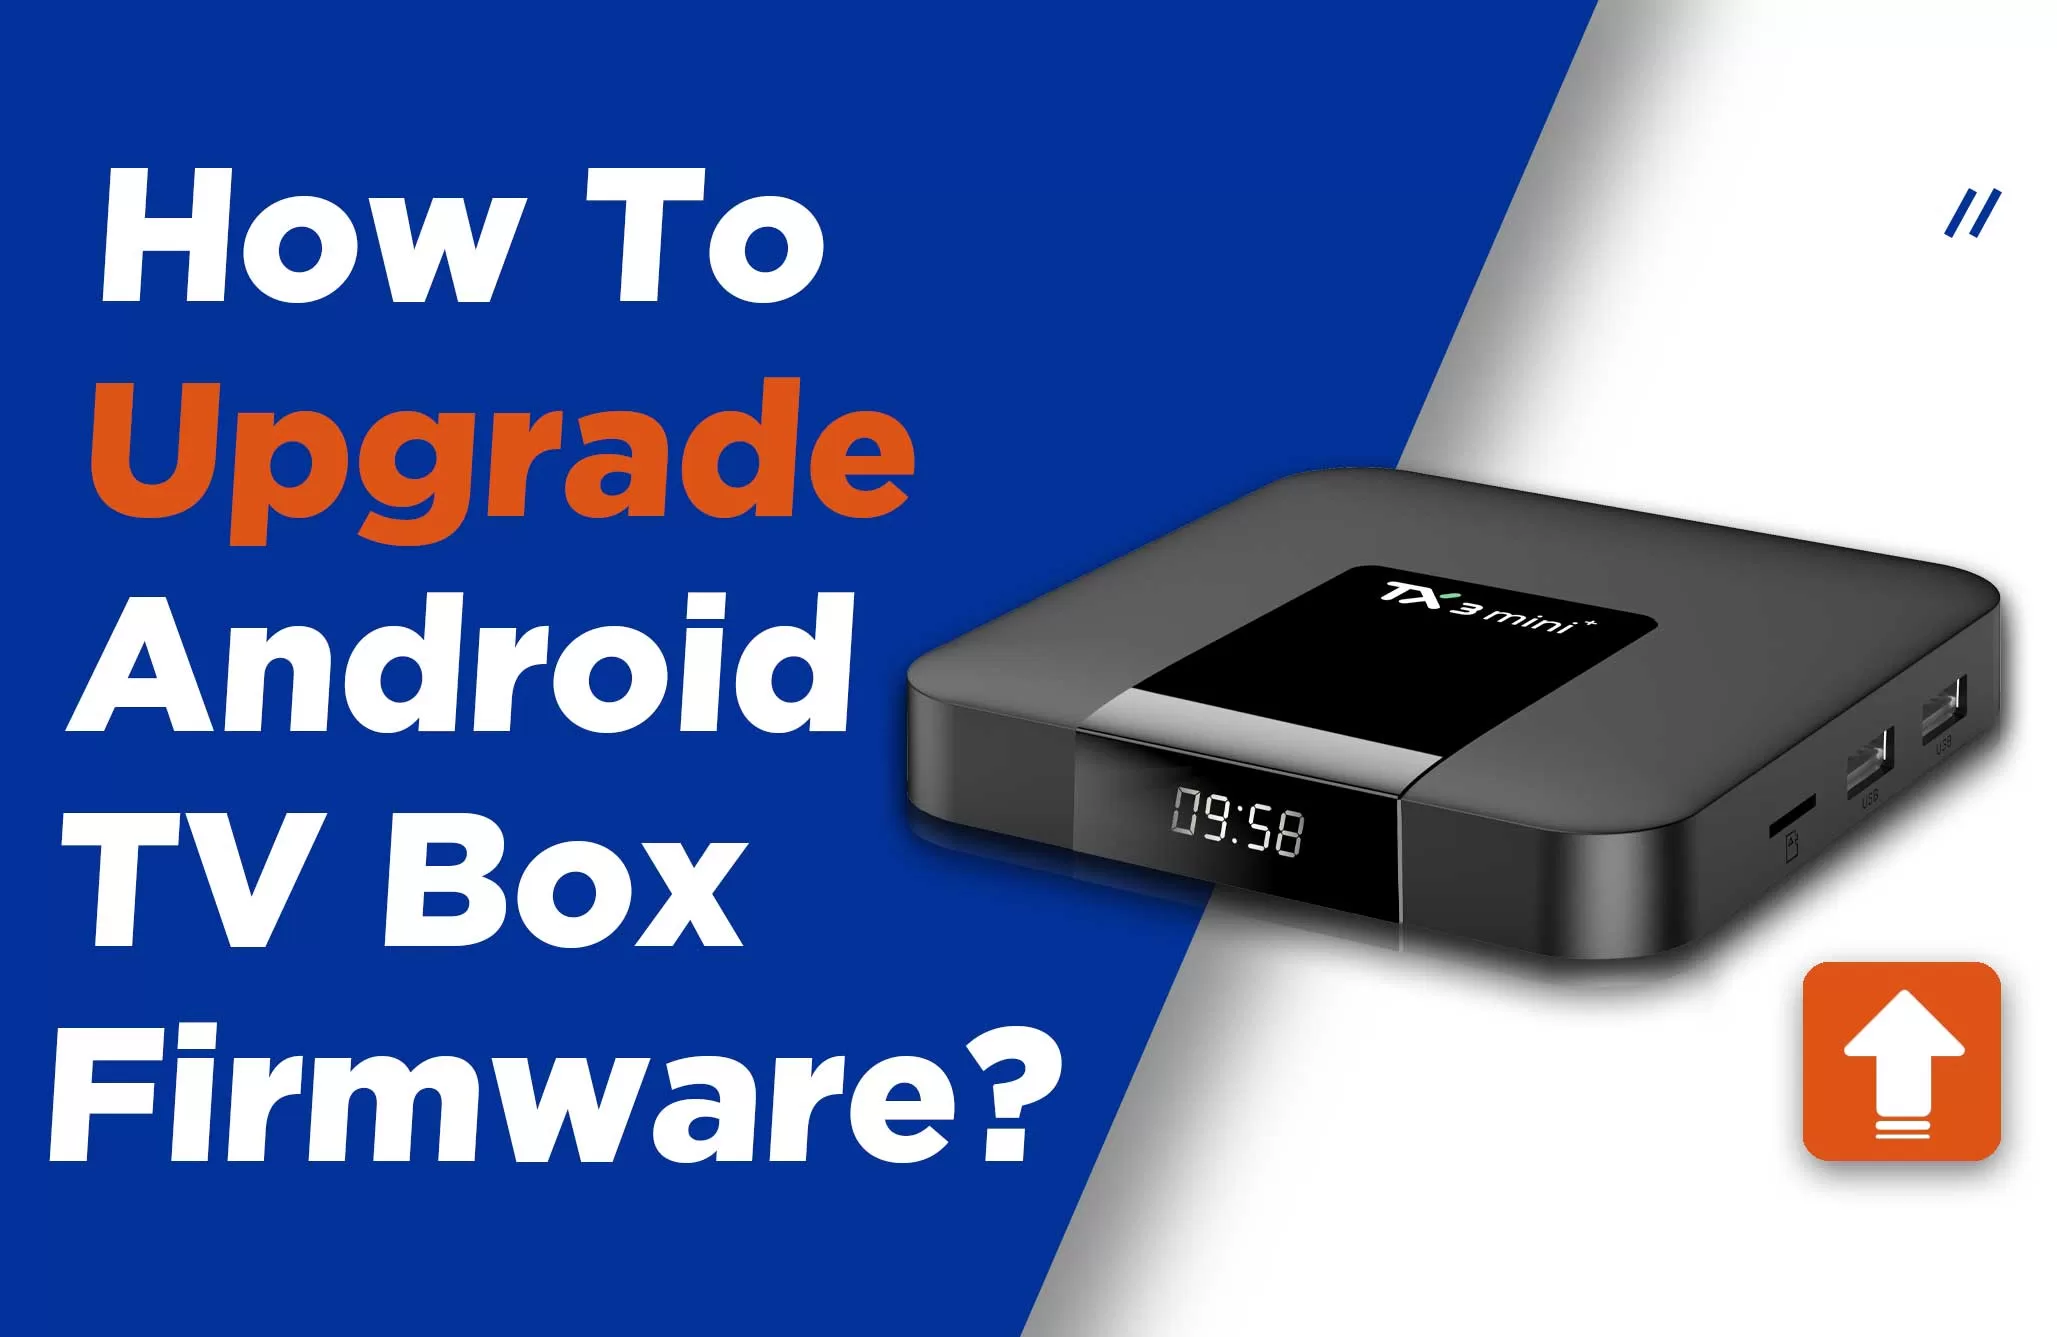 How to upgrade Android TV box firmware